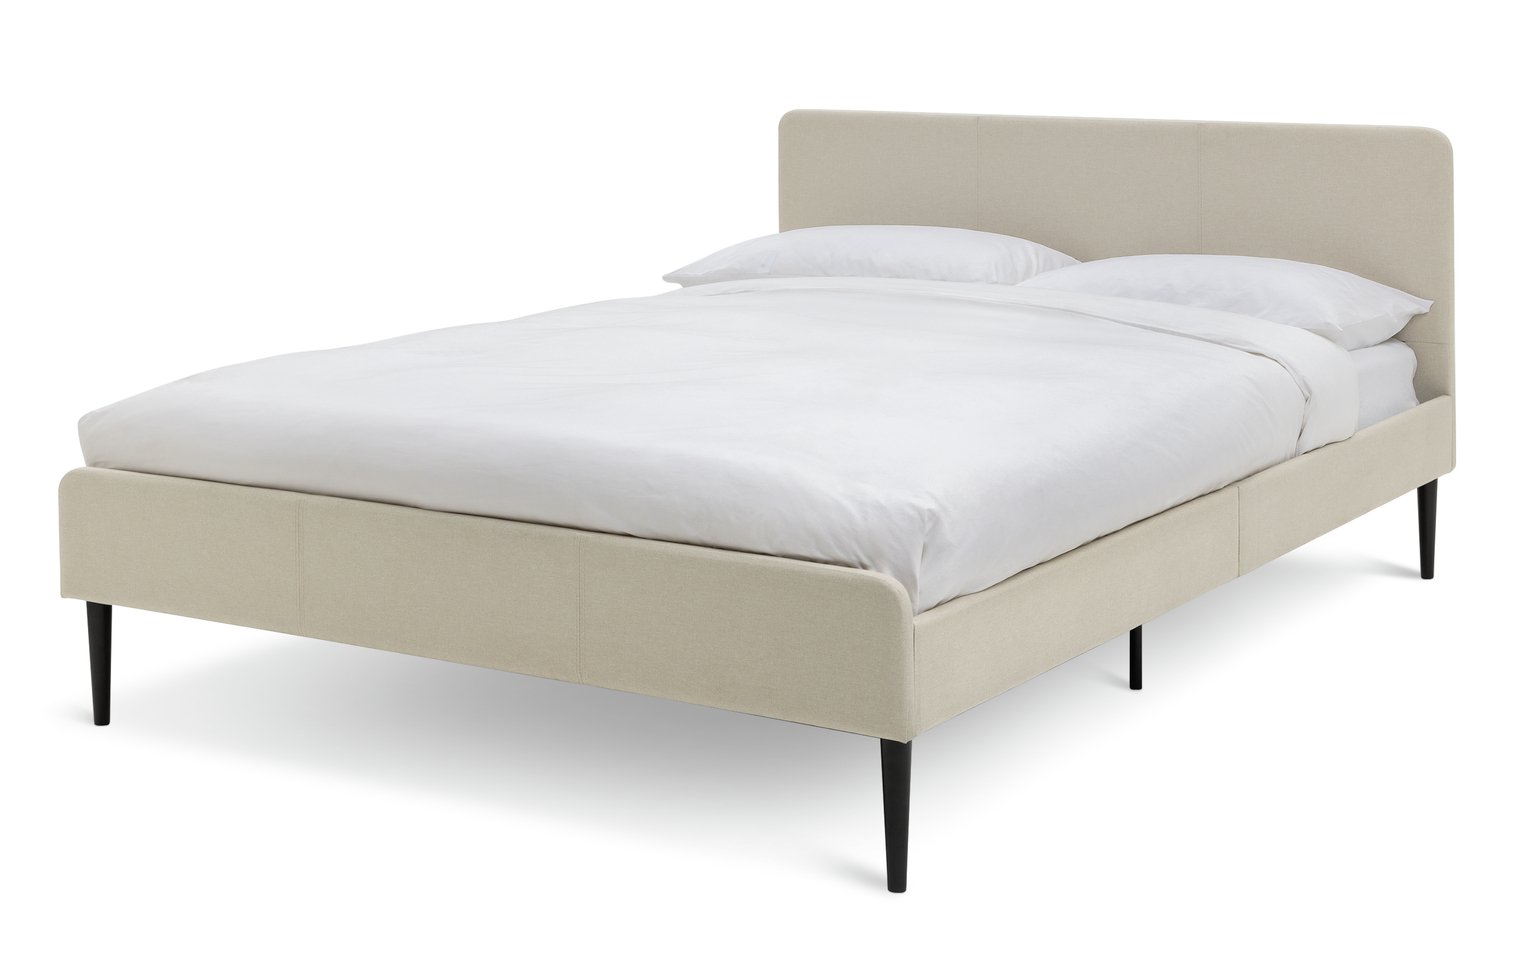 Habitat Kristopher Small Double Fabric Bed Frame - Cream